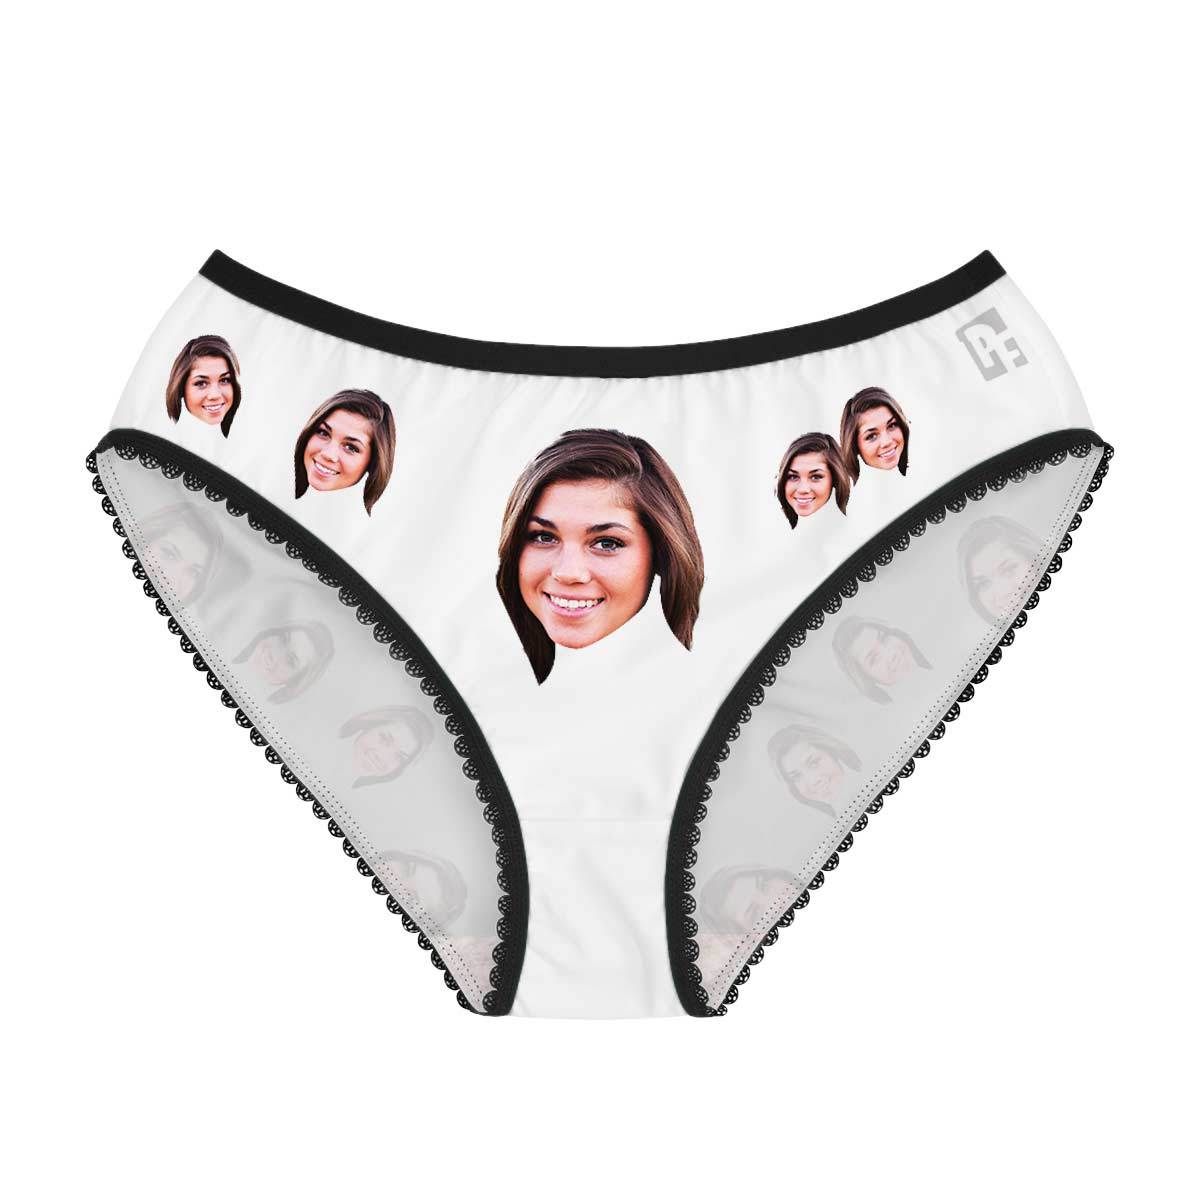 Blue Blank Design women's underwear briefs personalized with photo printed on them